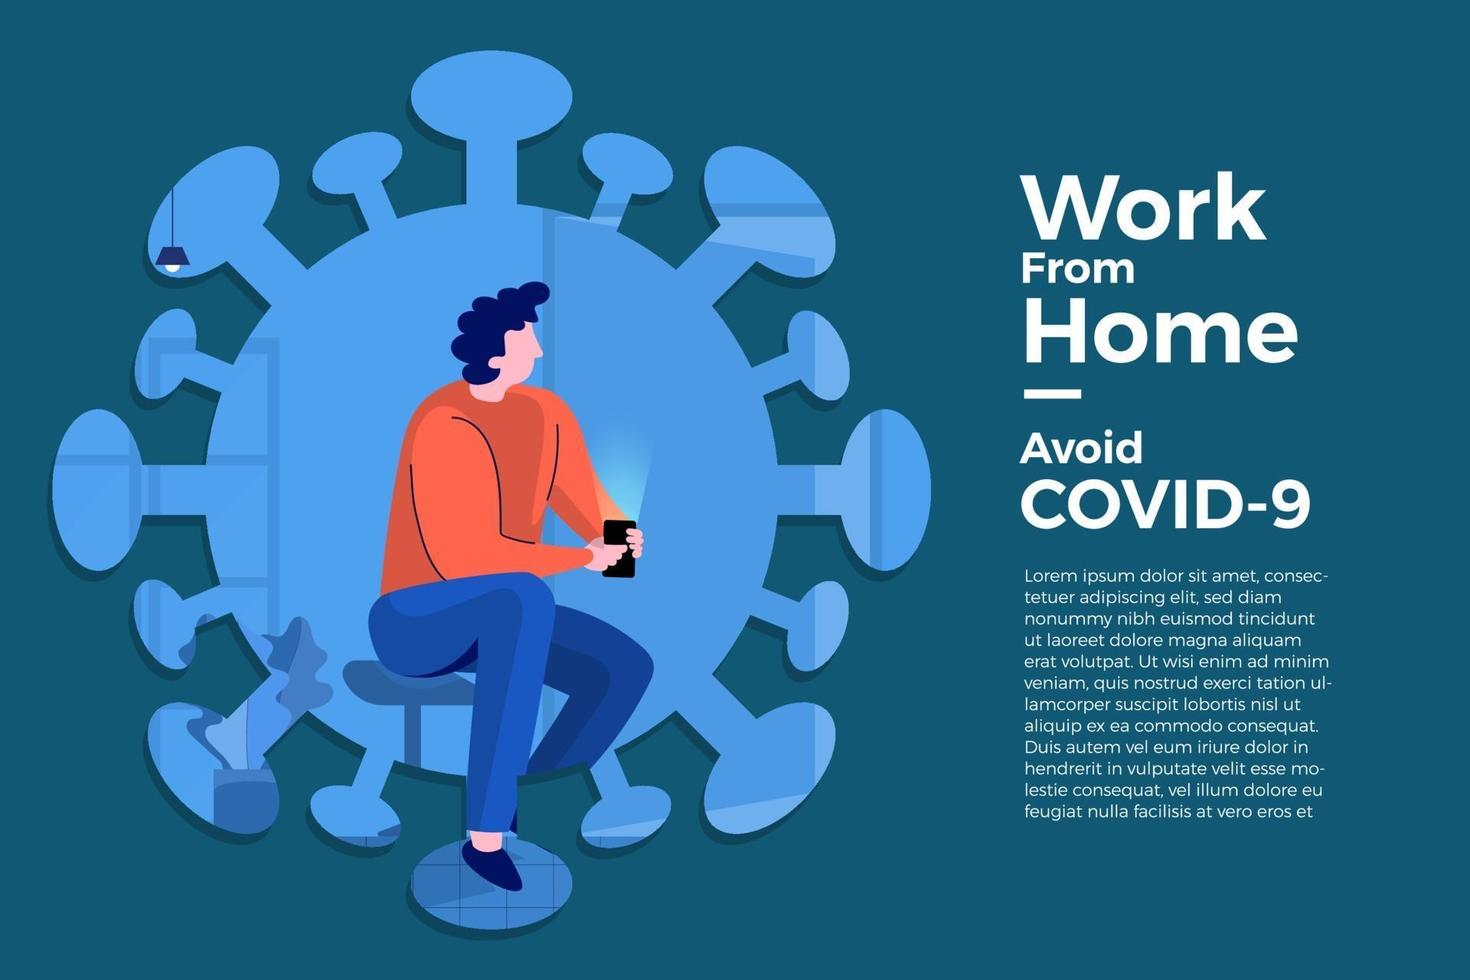 Working from home to avoid COVID-19 vector